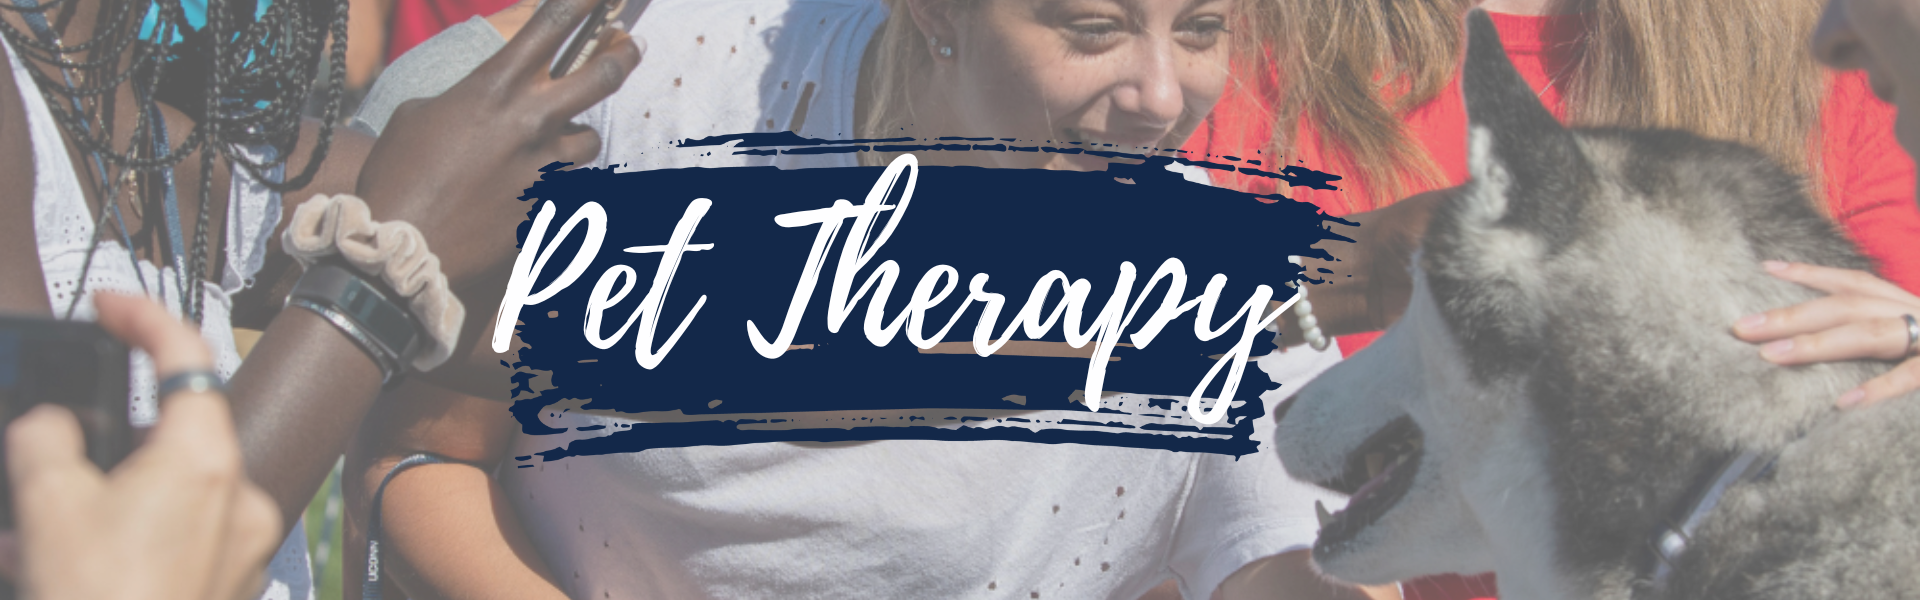 Pet Therapy Banner